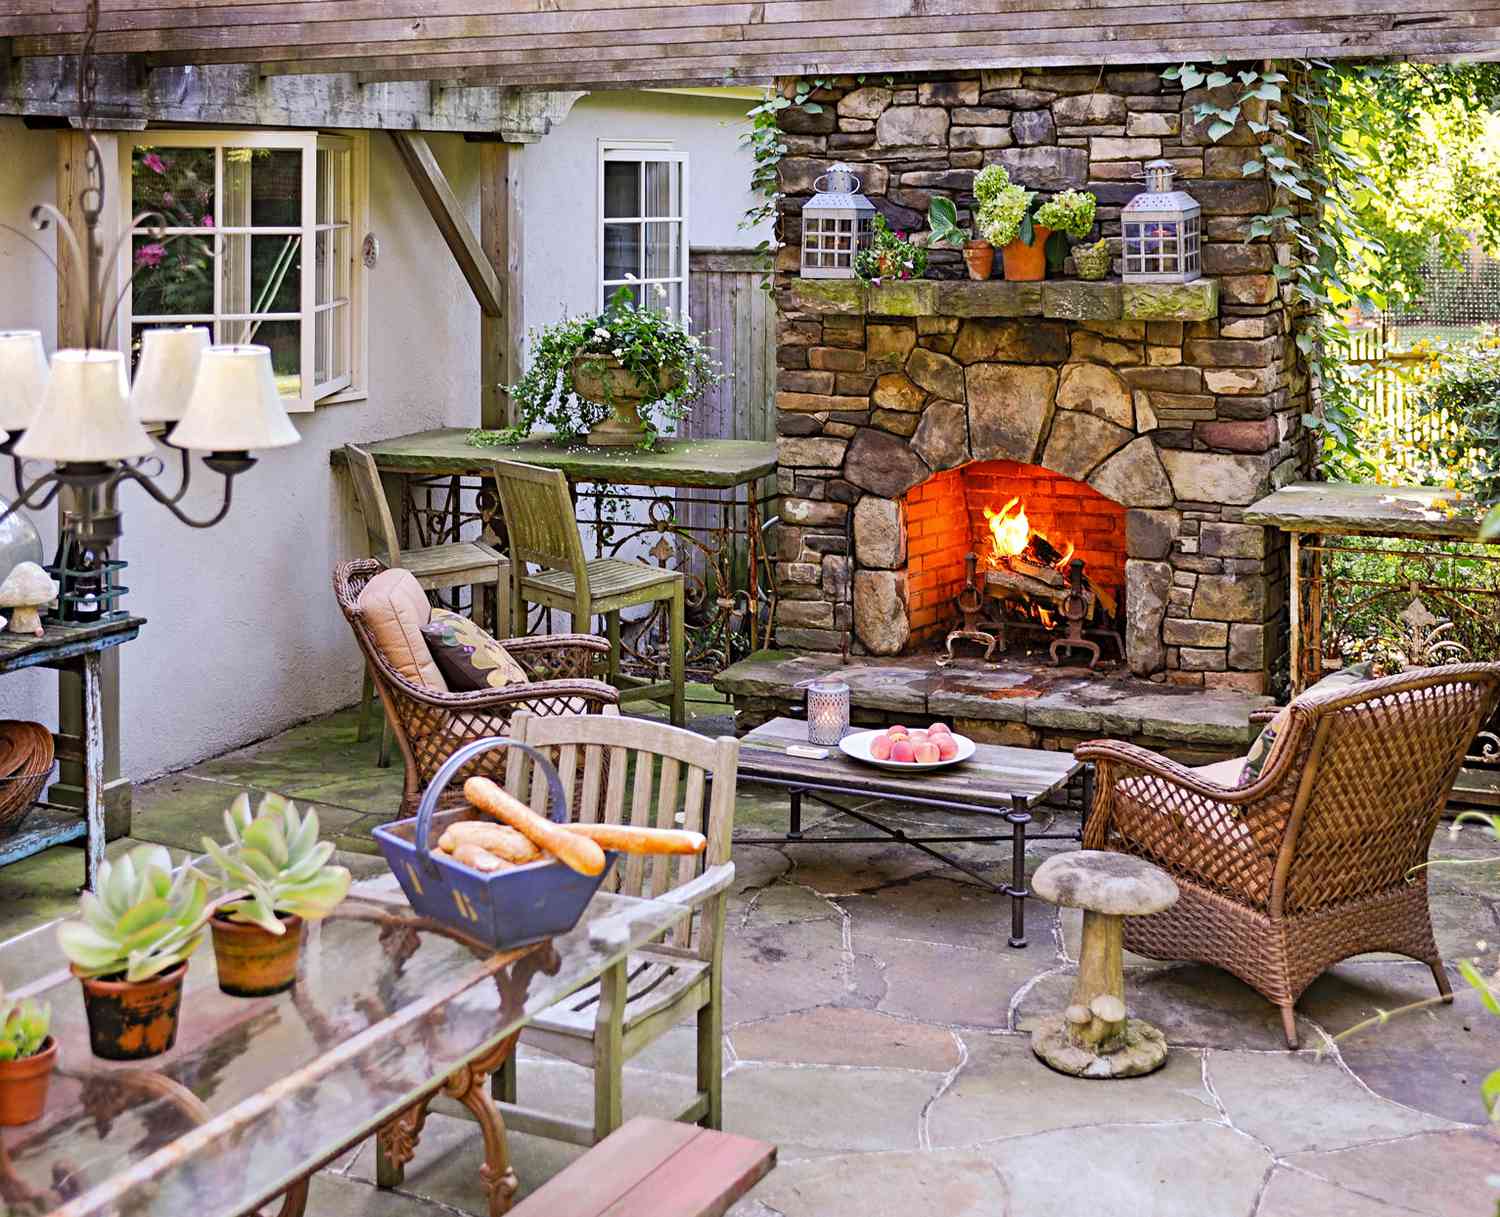 Rustic Outdoor Fireplace